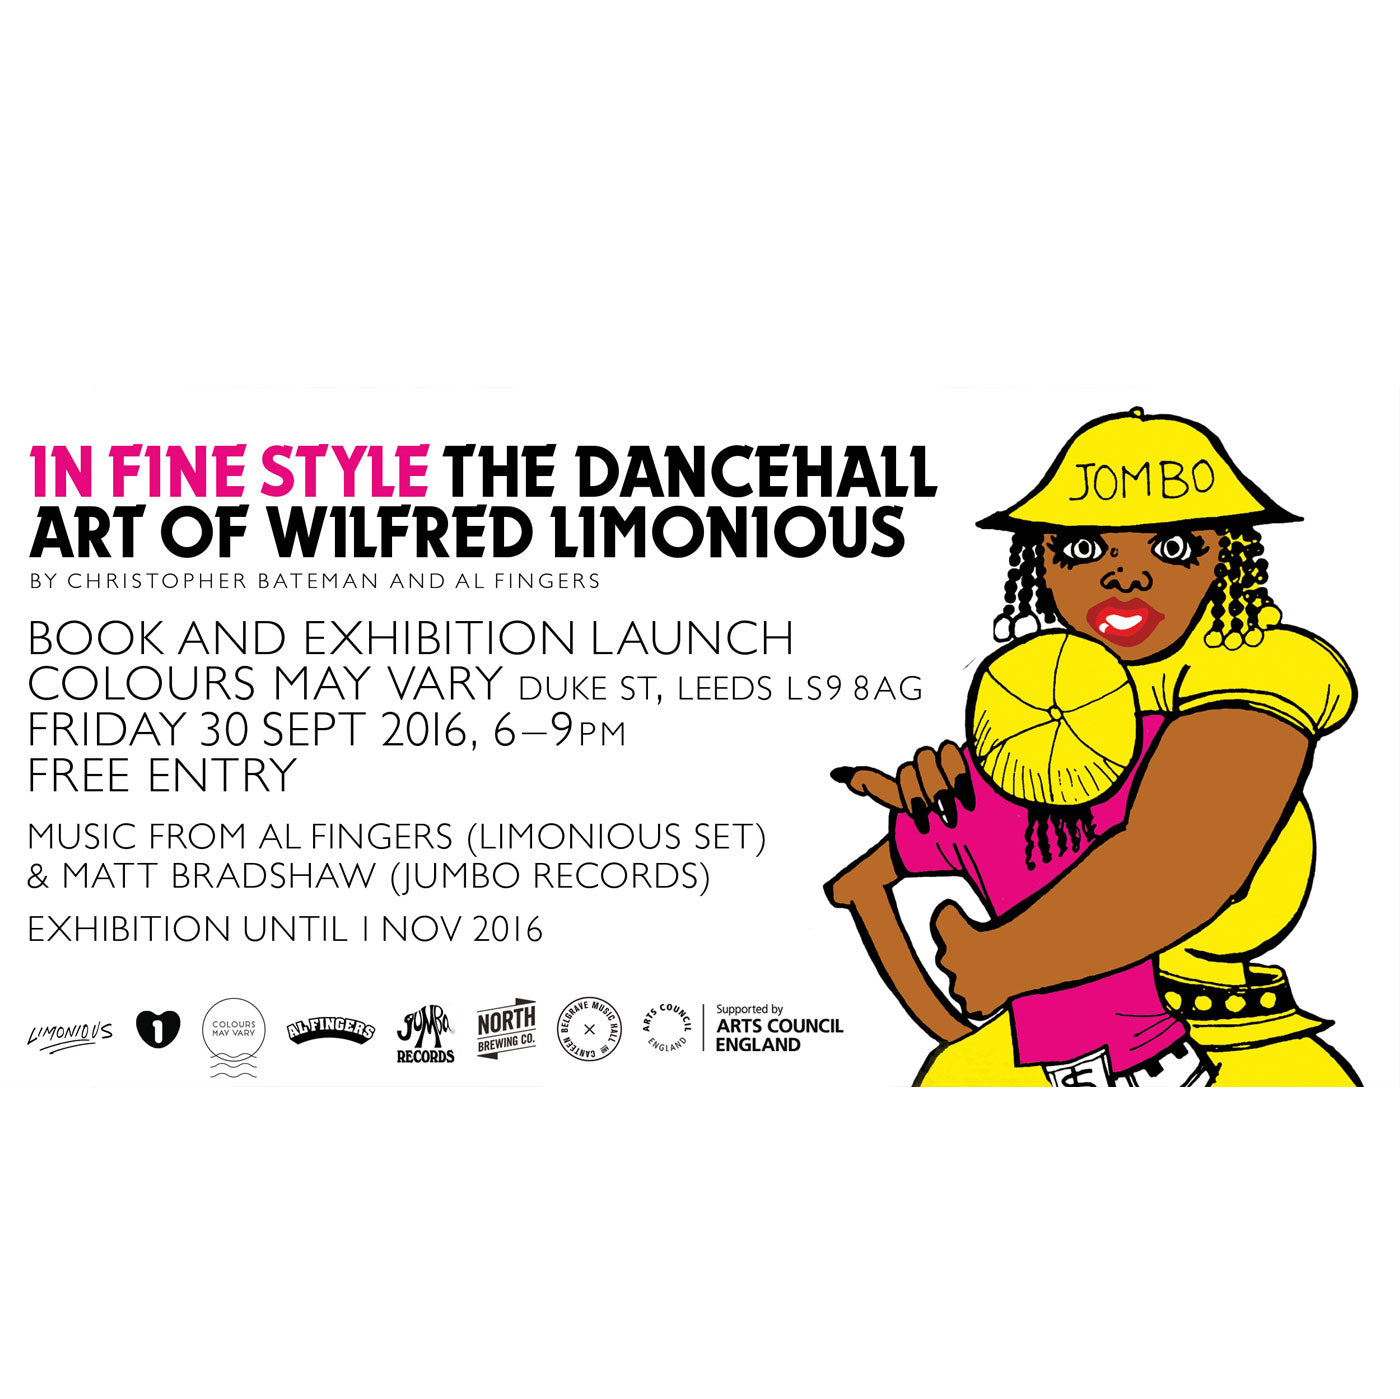 'In Fine Style' The Dancehall Art of Wilfred Limonious - 30th September - 1st November 2016